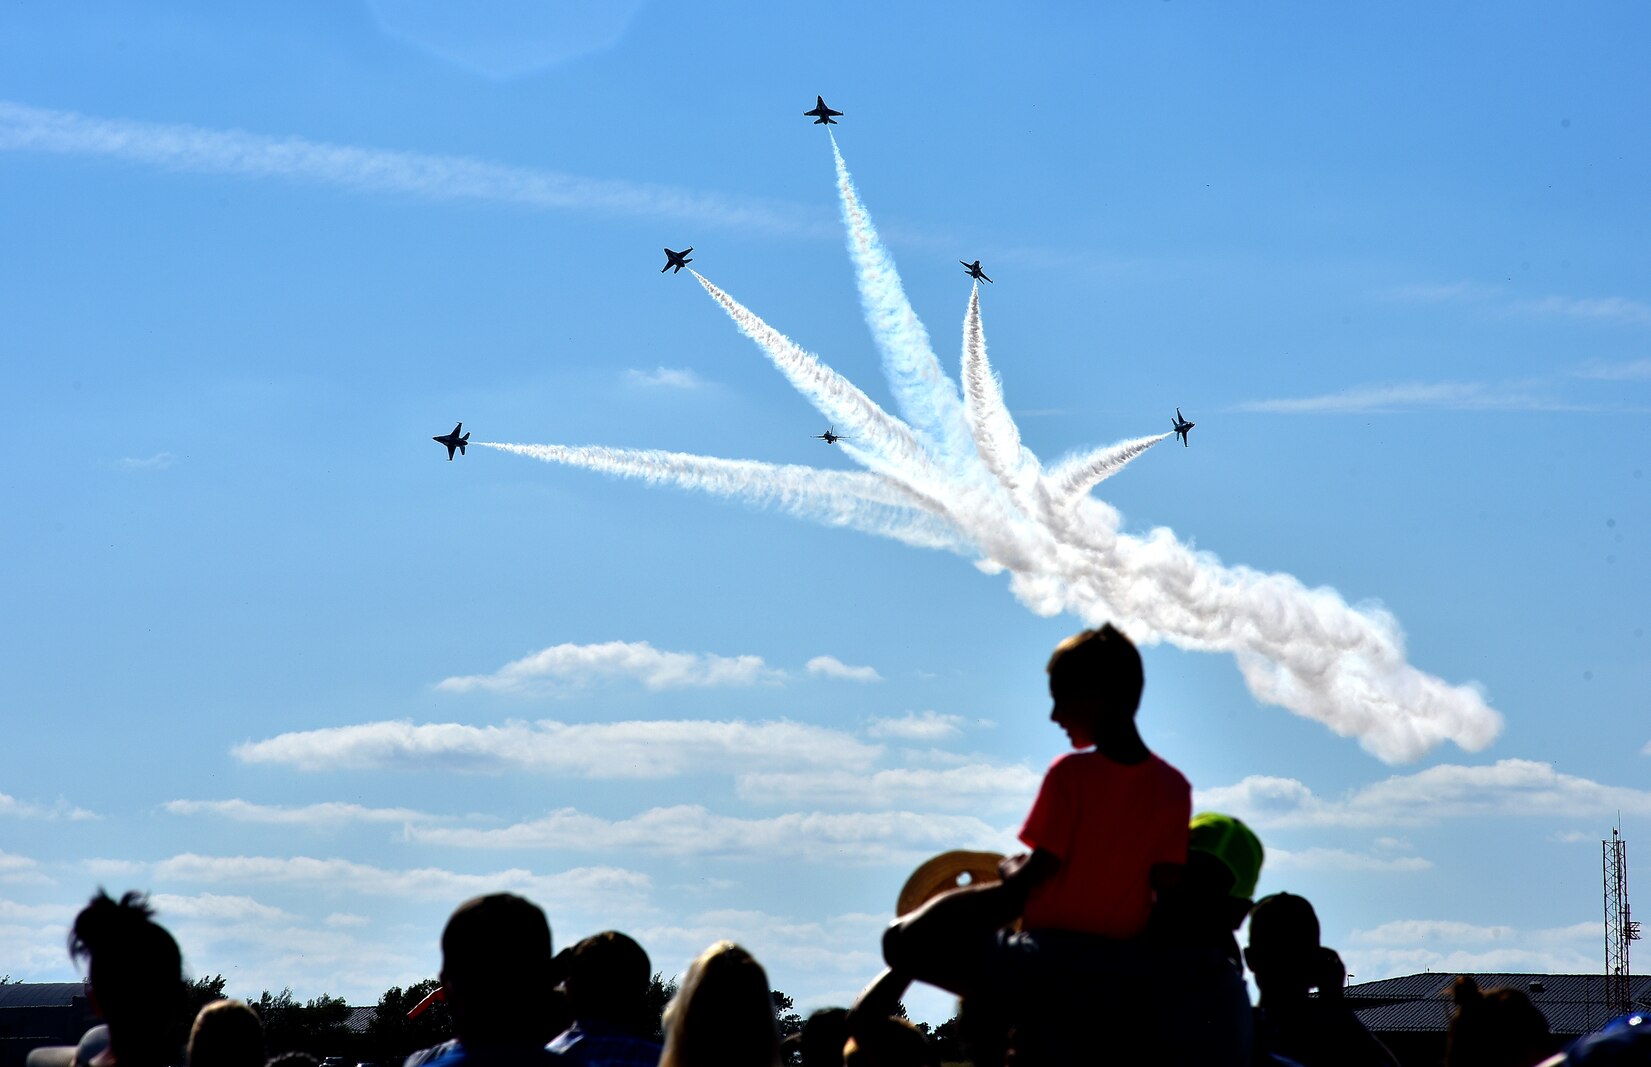 Members of the crowd watch as the Thunderbirds break formation during the Frontiers in Flight Open House and Air Show Sept. 9, 2018, at McConnell Air Force Base, Kansas. Pilots from across the Air Force, with all different backgrounds are selected to fly for the Thunderbirds. (U.S. Air Force photo by Staff Sgt. Trevor Rhynes)